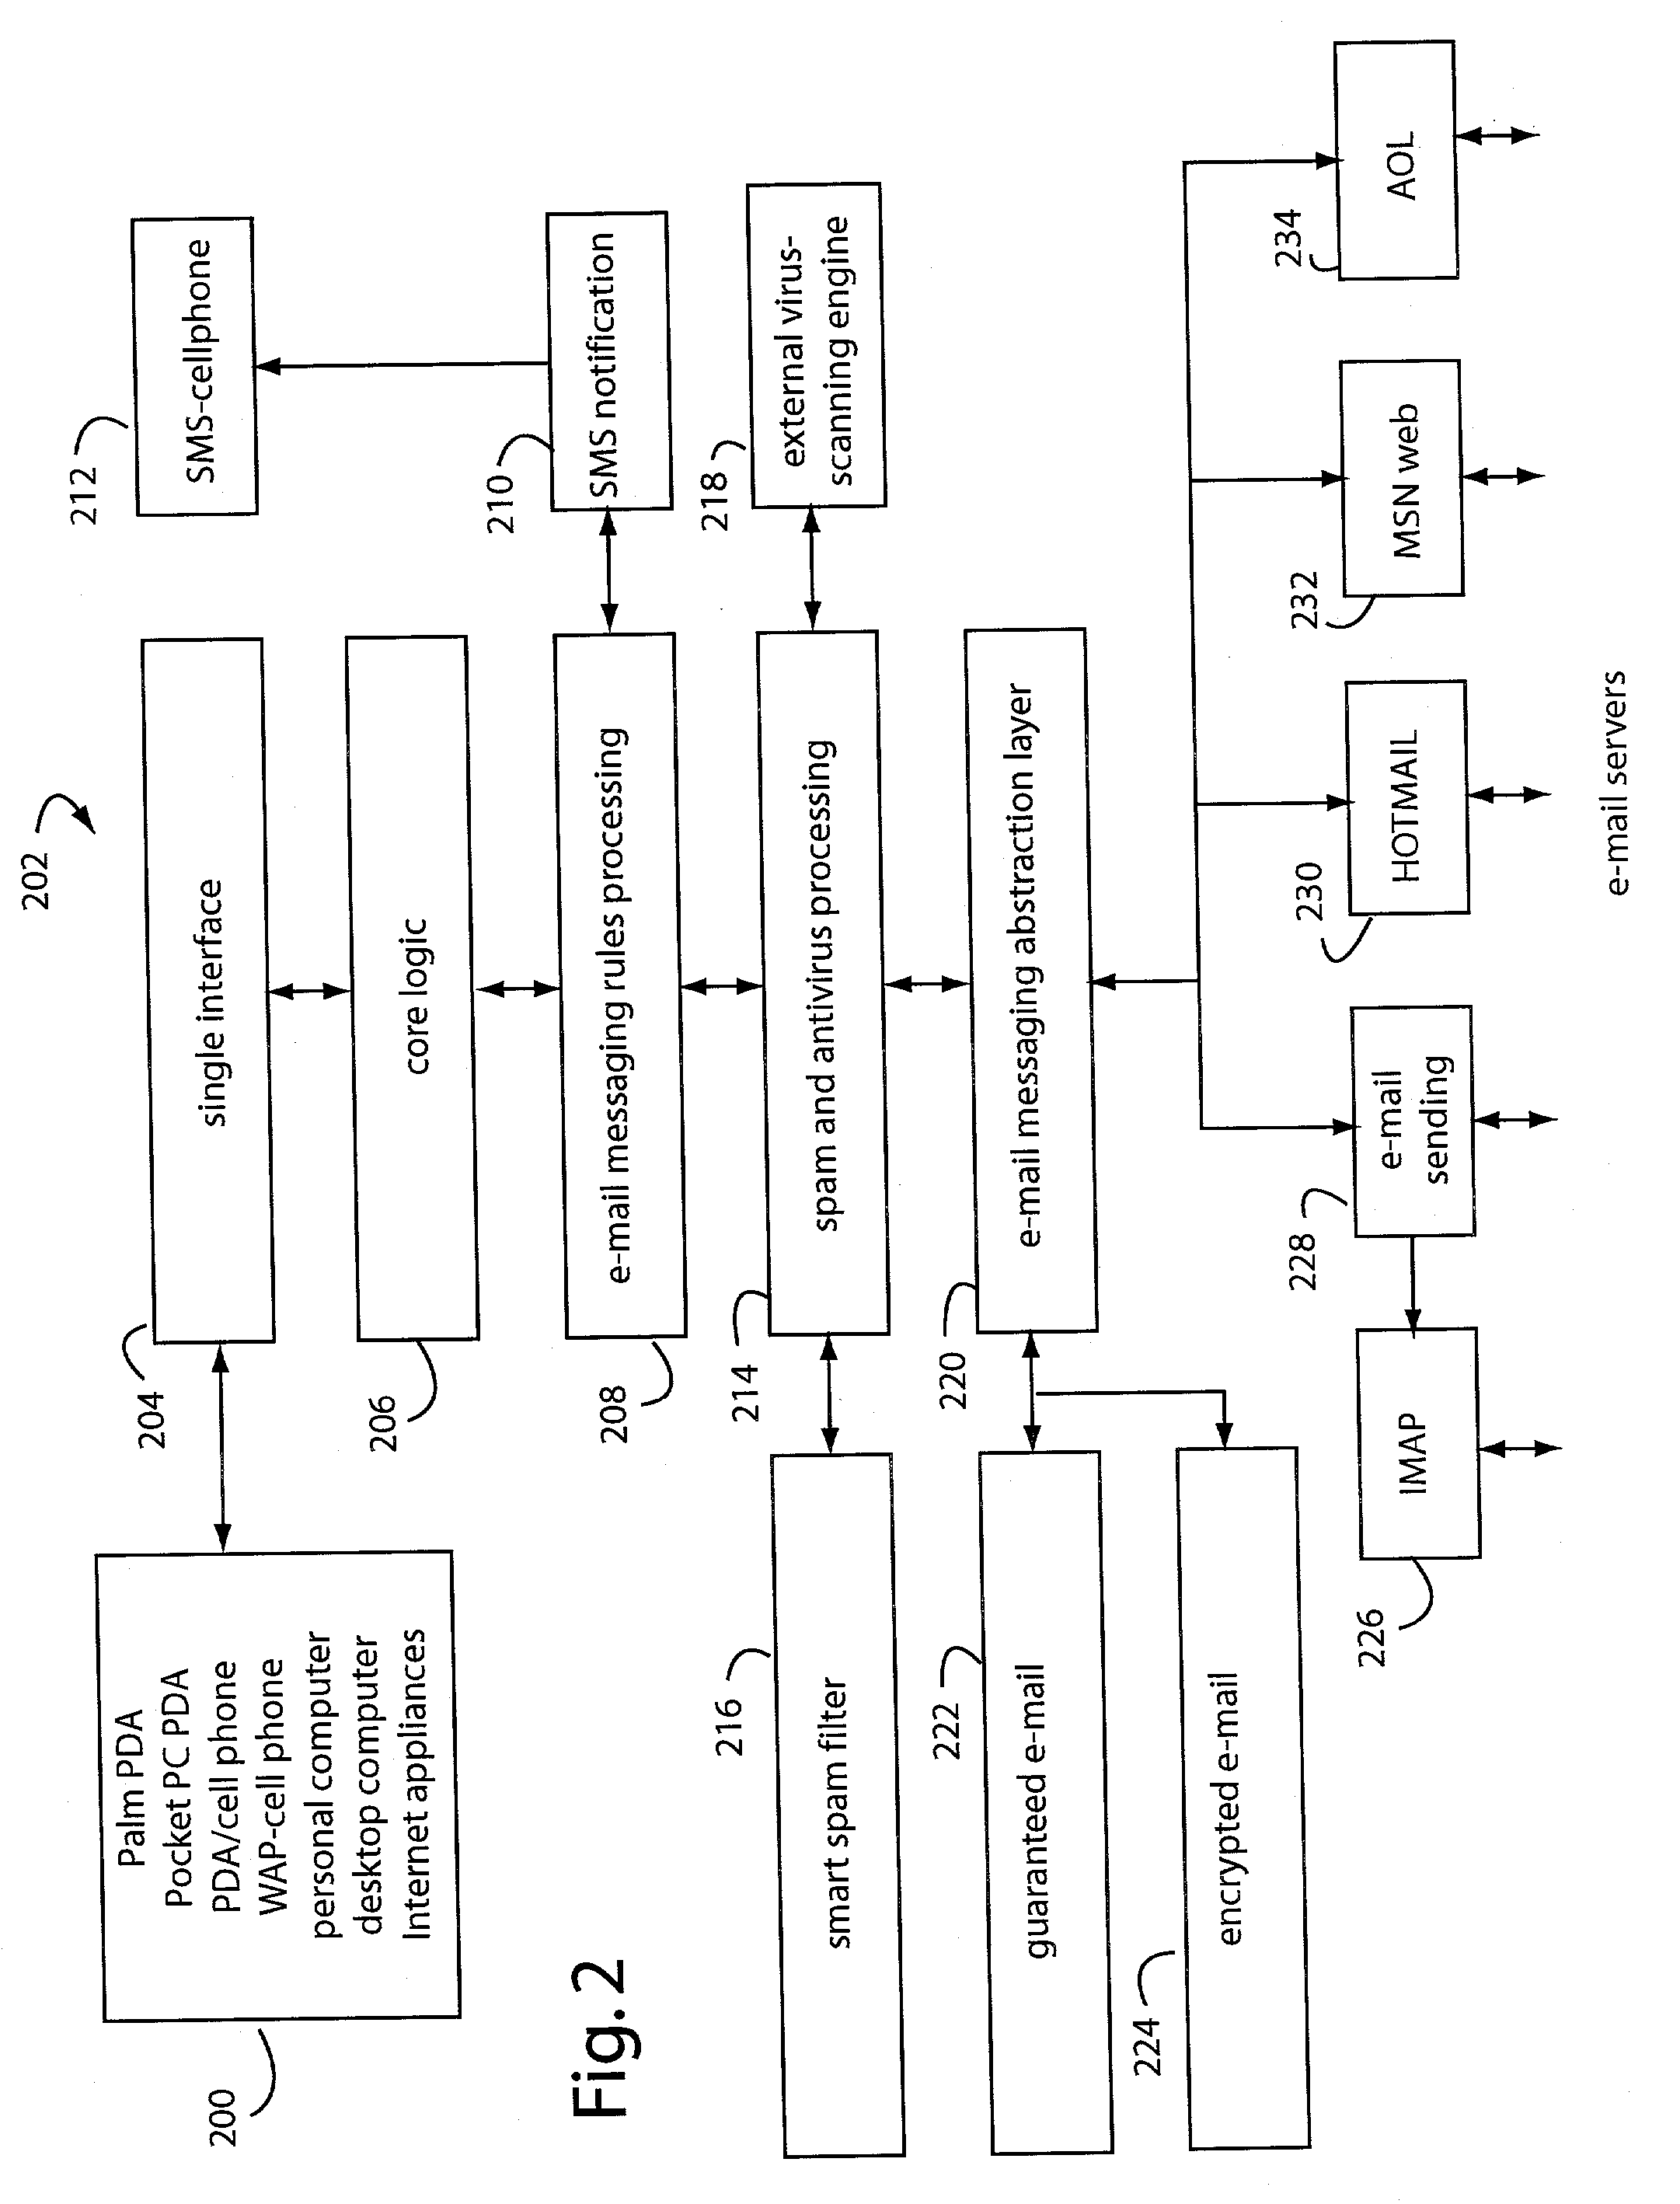 Personal e-mail system and method